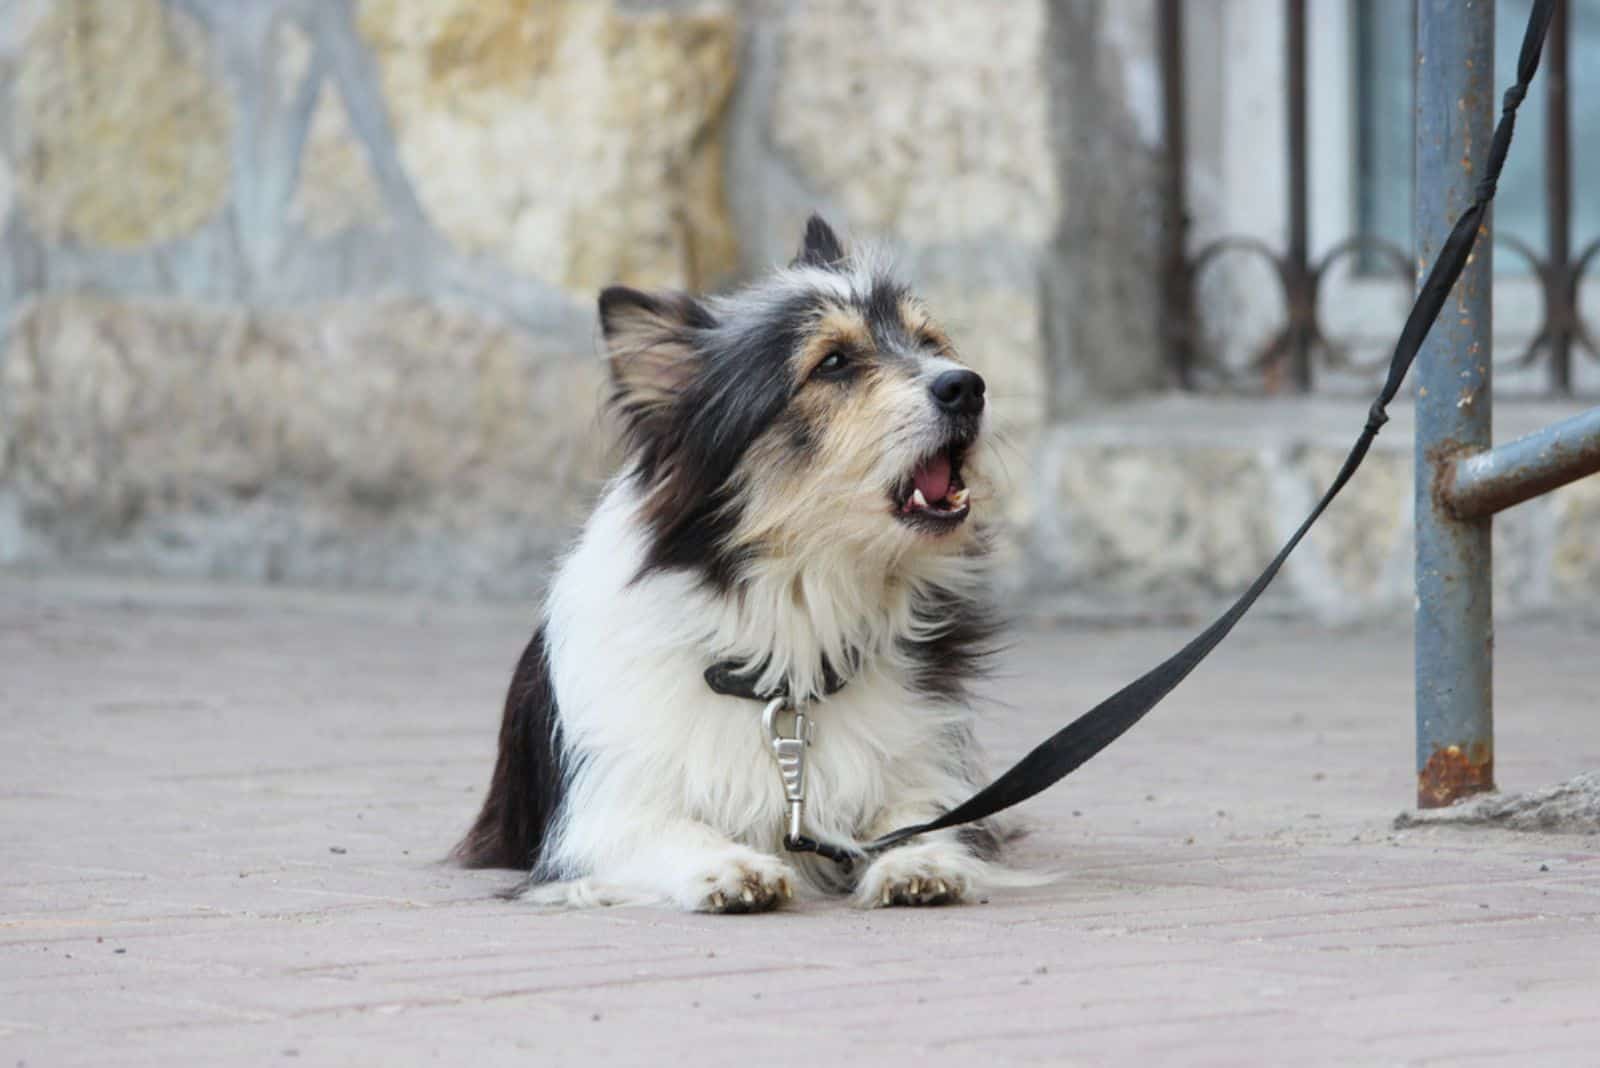 A small black and white dog waiting for the owner 